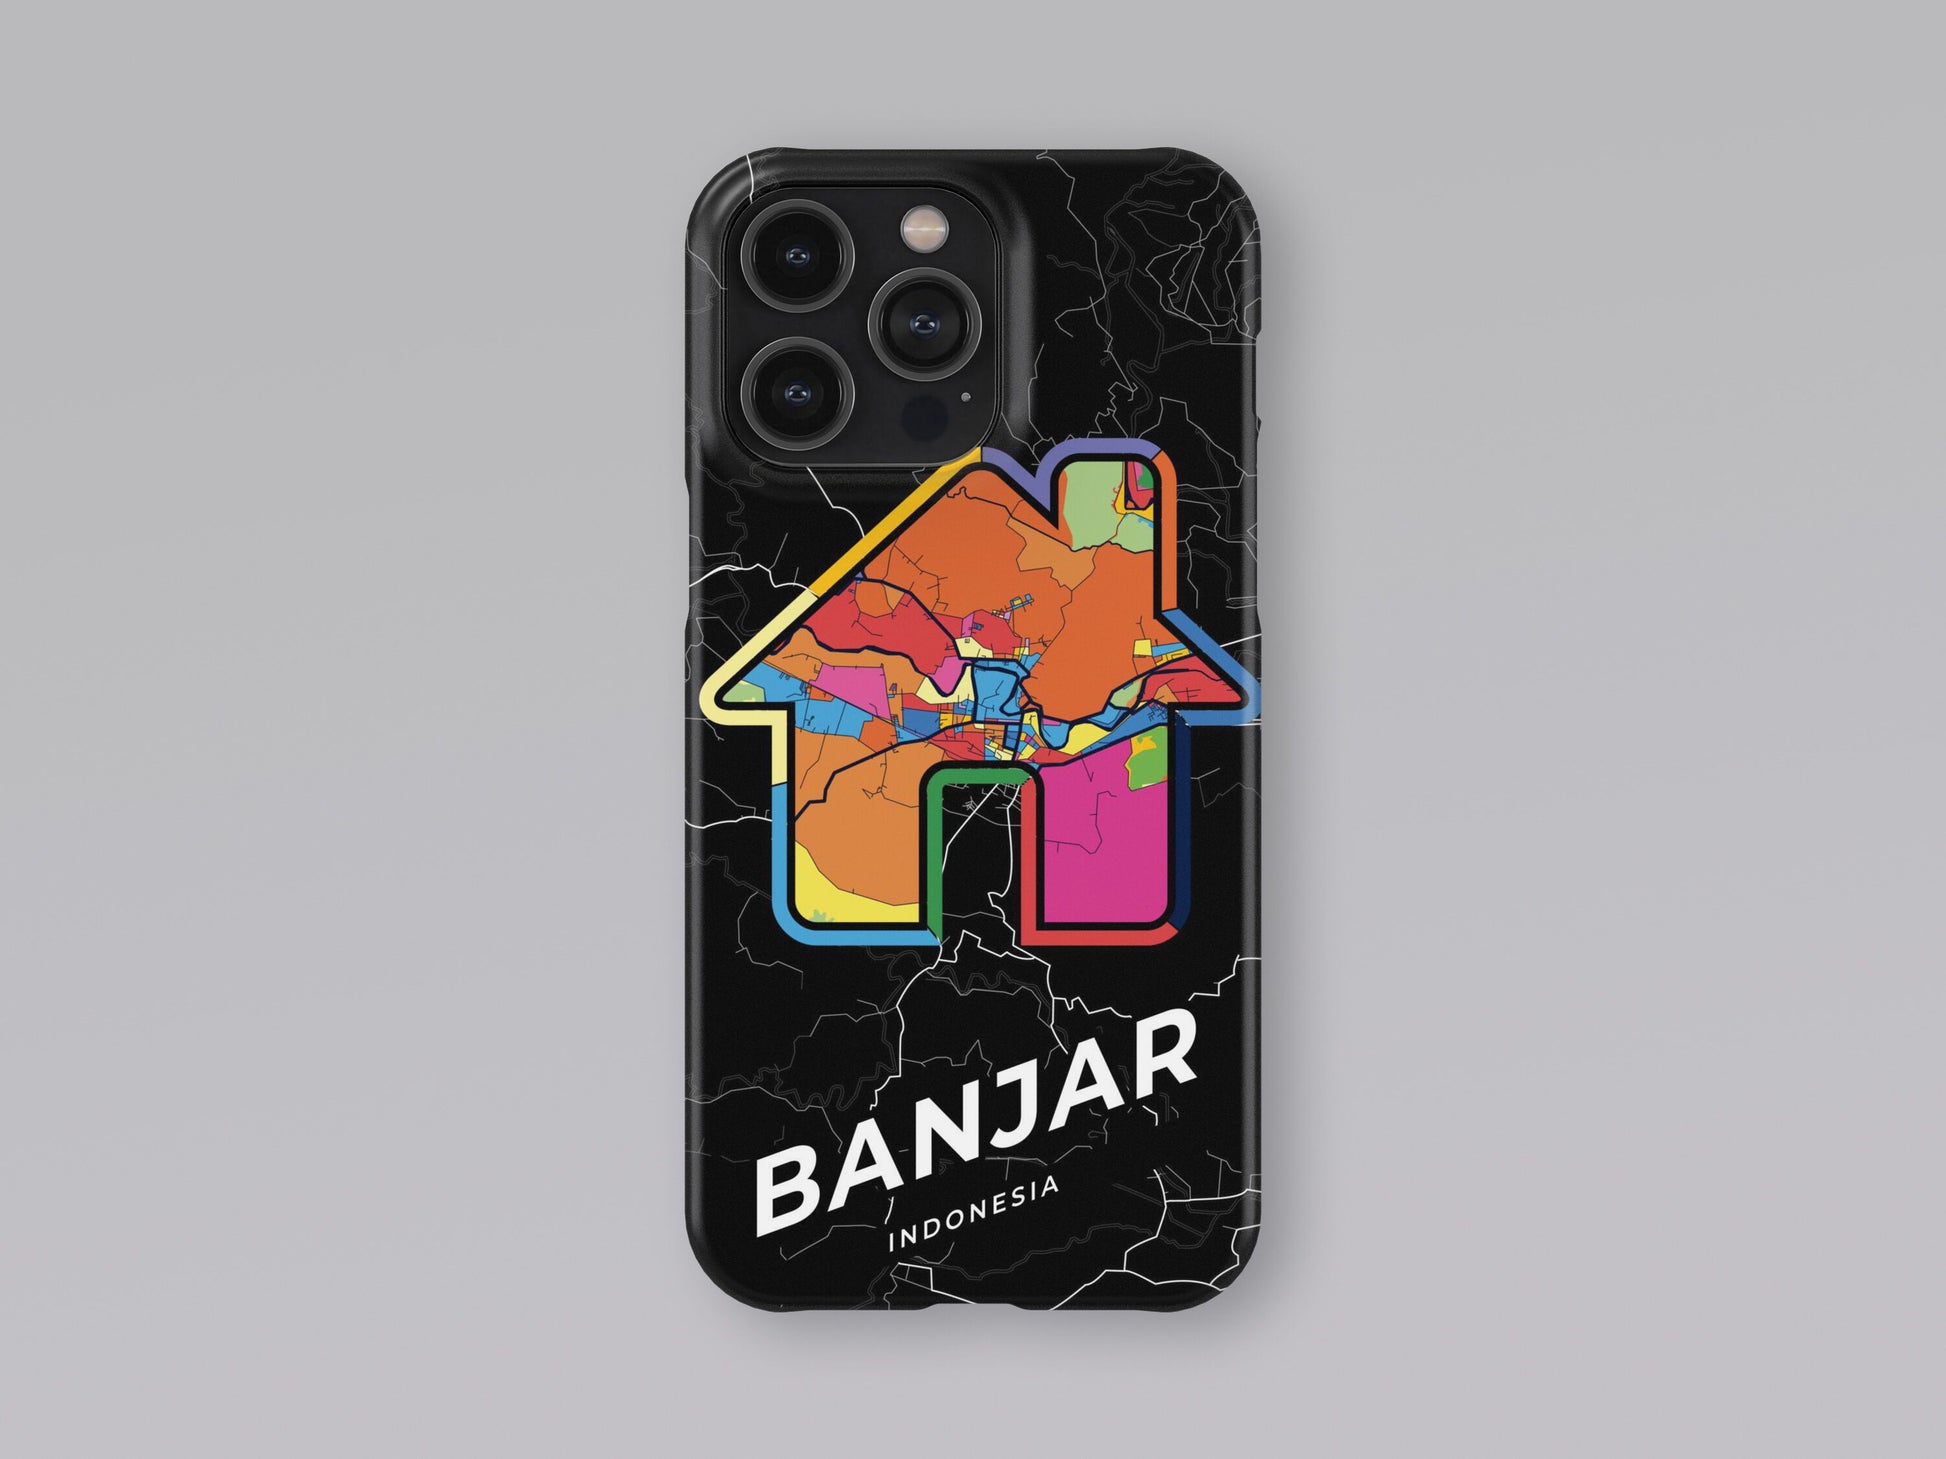 Banjar Indonesia slim phone case with colorful icon. Birthday, wedding or housewarming gift. Couple match cases. 3